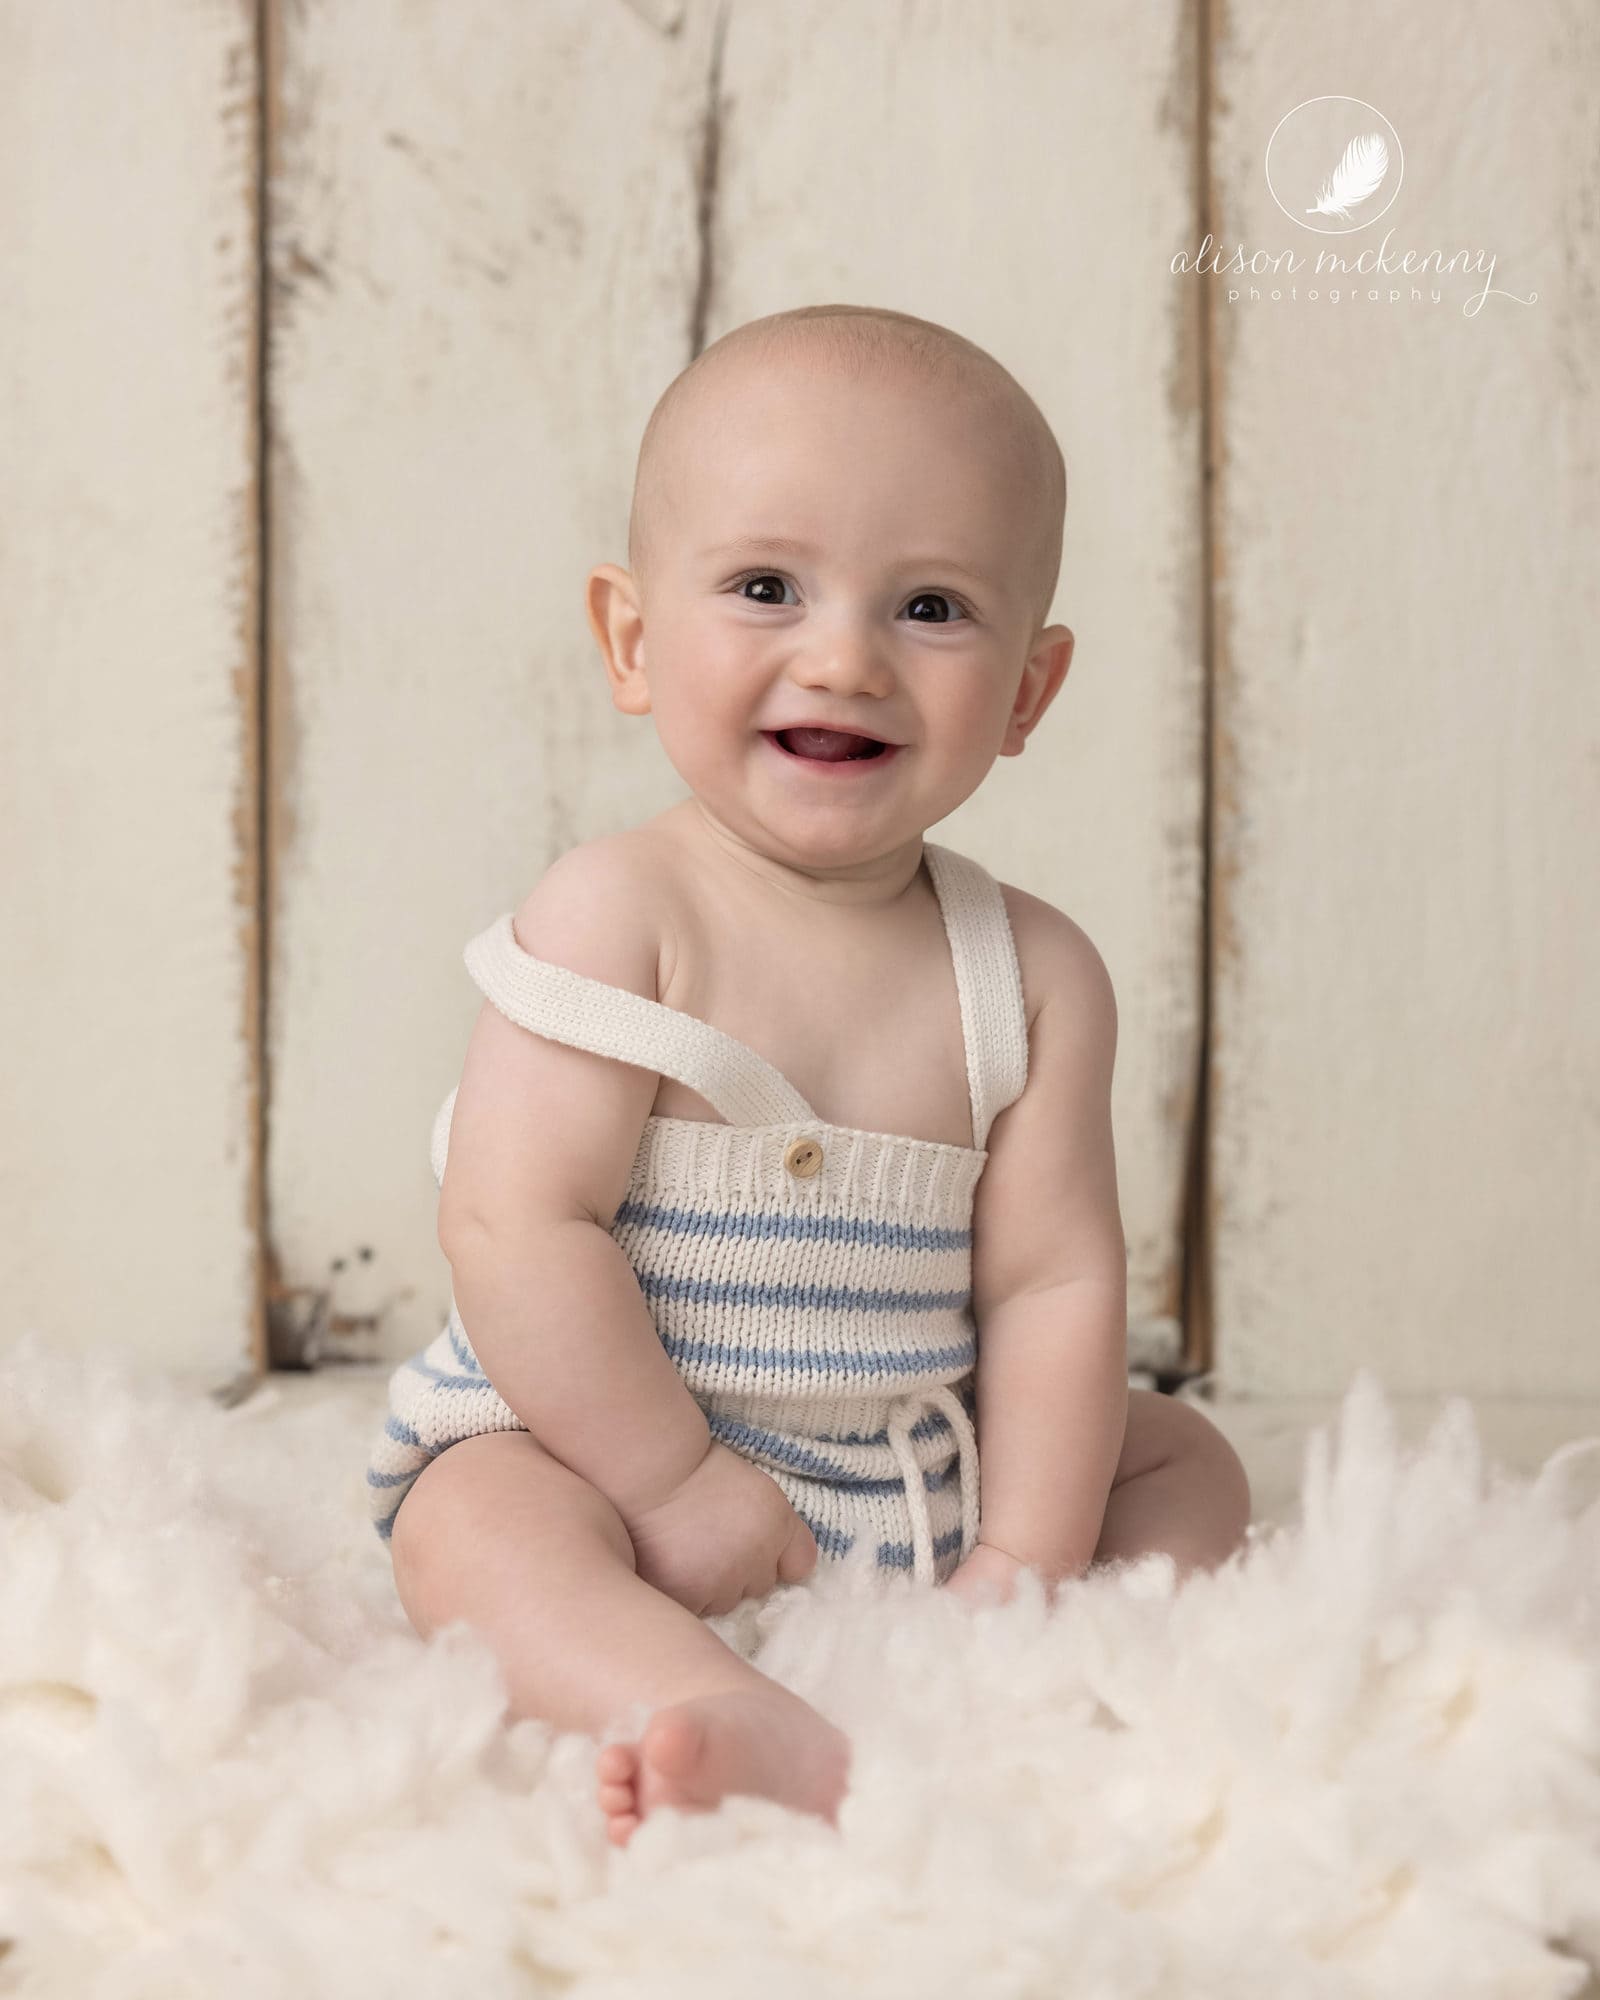 Smiling baby on cream background and fur rug